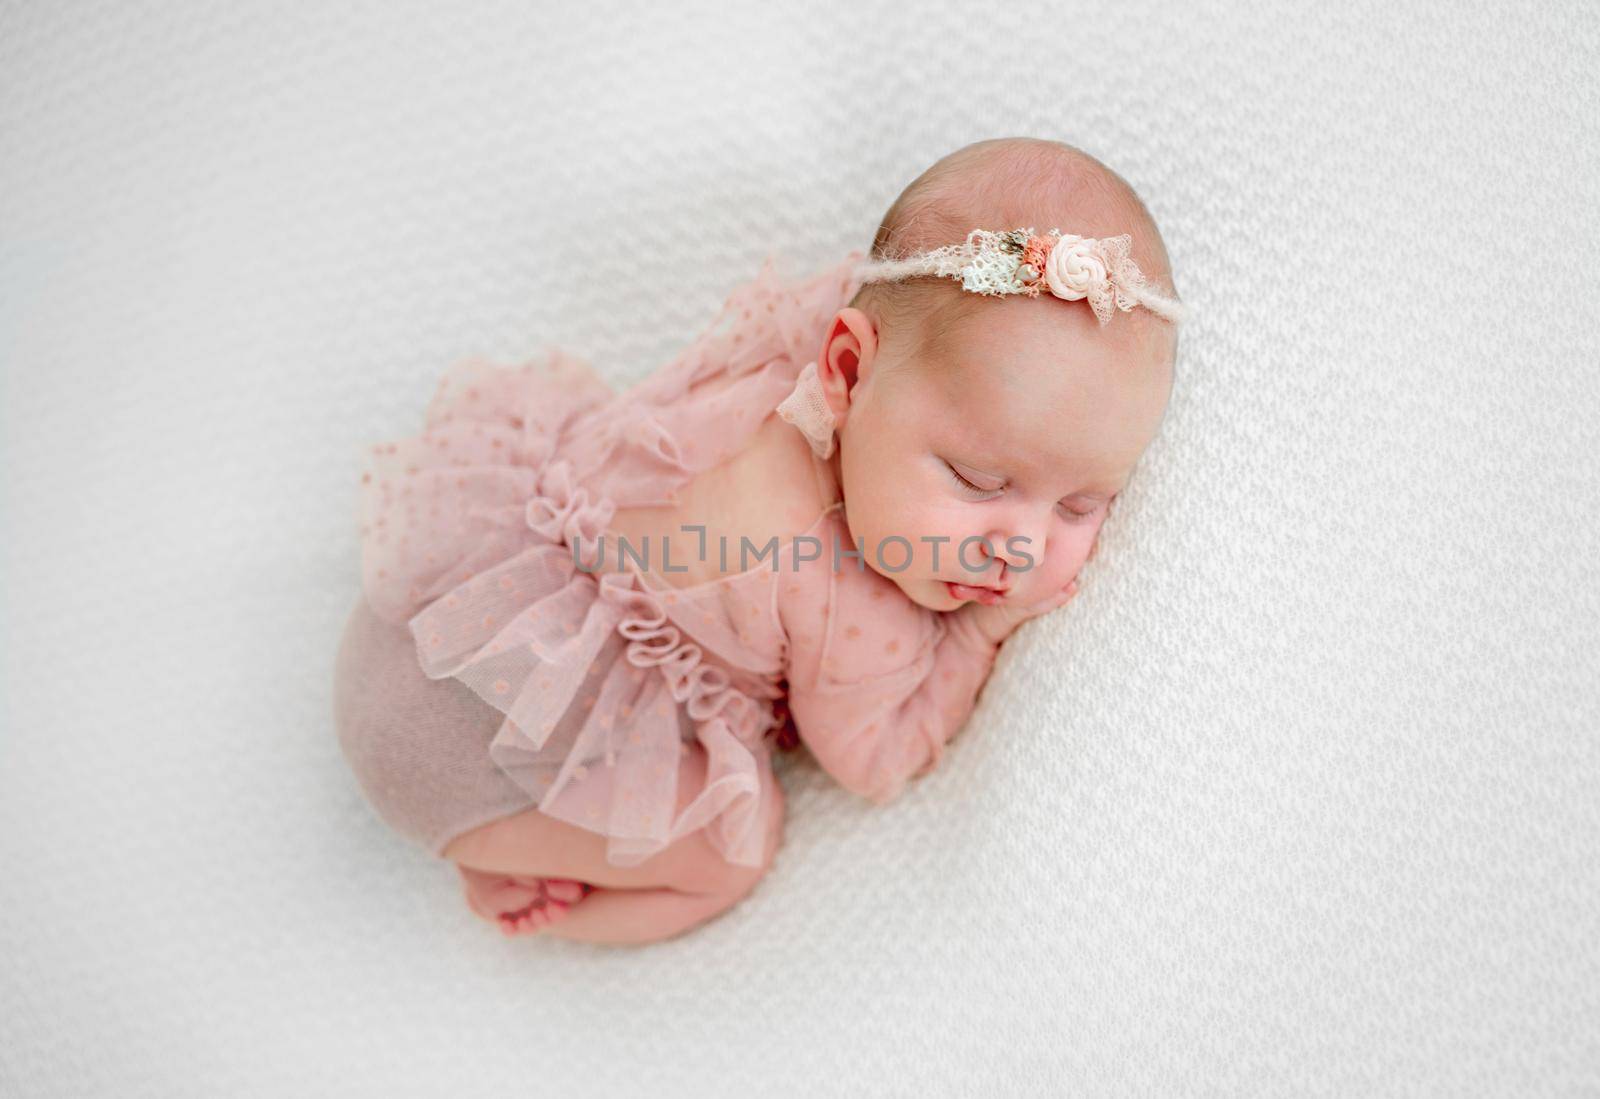 Newborn baby girl wearing cute costume sleeping and holding her hands under cheek. Little cute infant child napping lying on her tummy on white fabric. Adorable kid during studio photoshoot